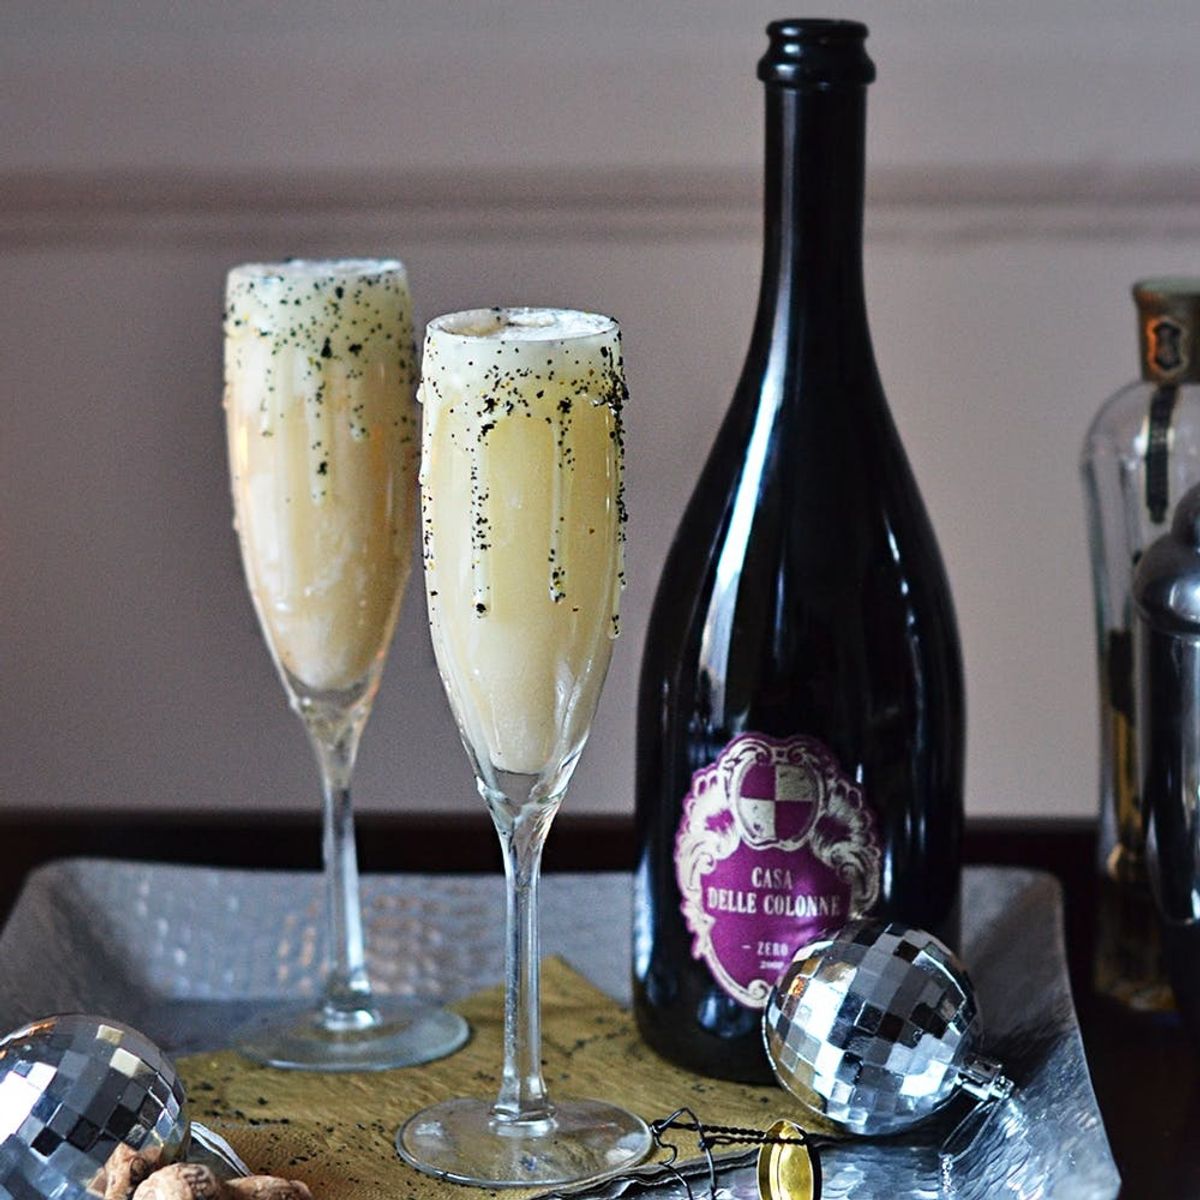 Cheers to the New Year With This Coconut Bubbly Cocktail Recipe - Brit + Co